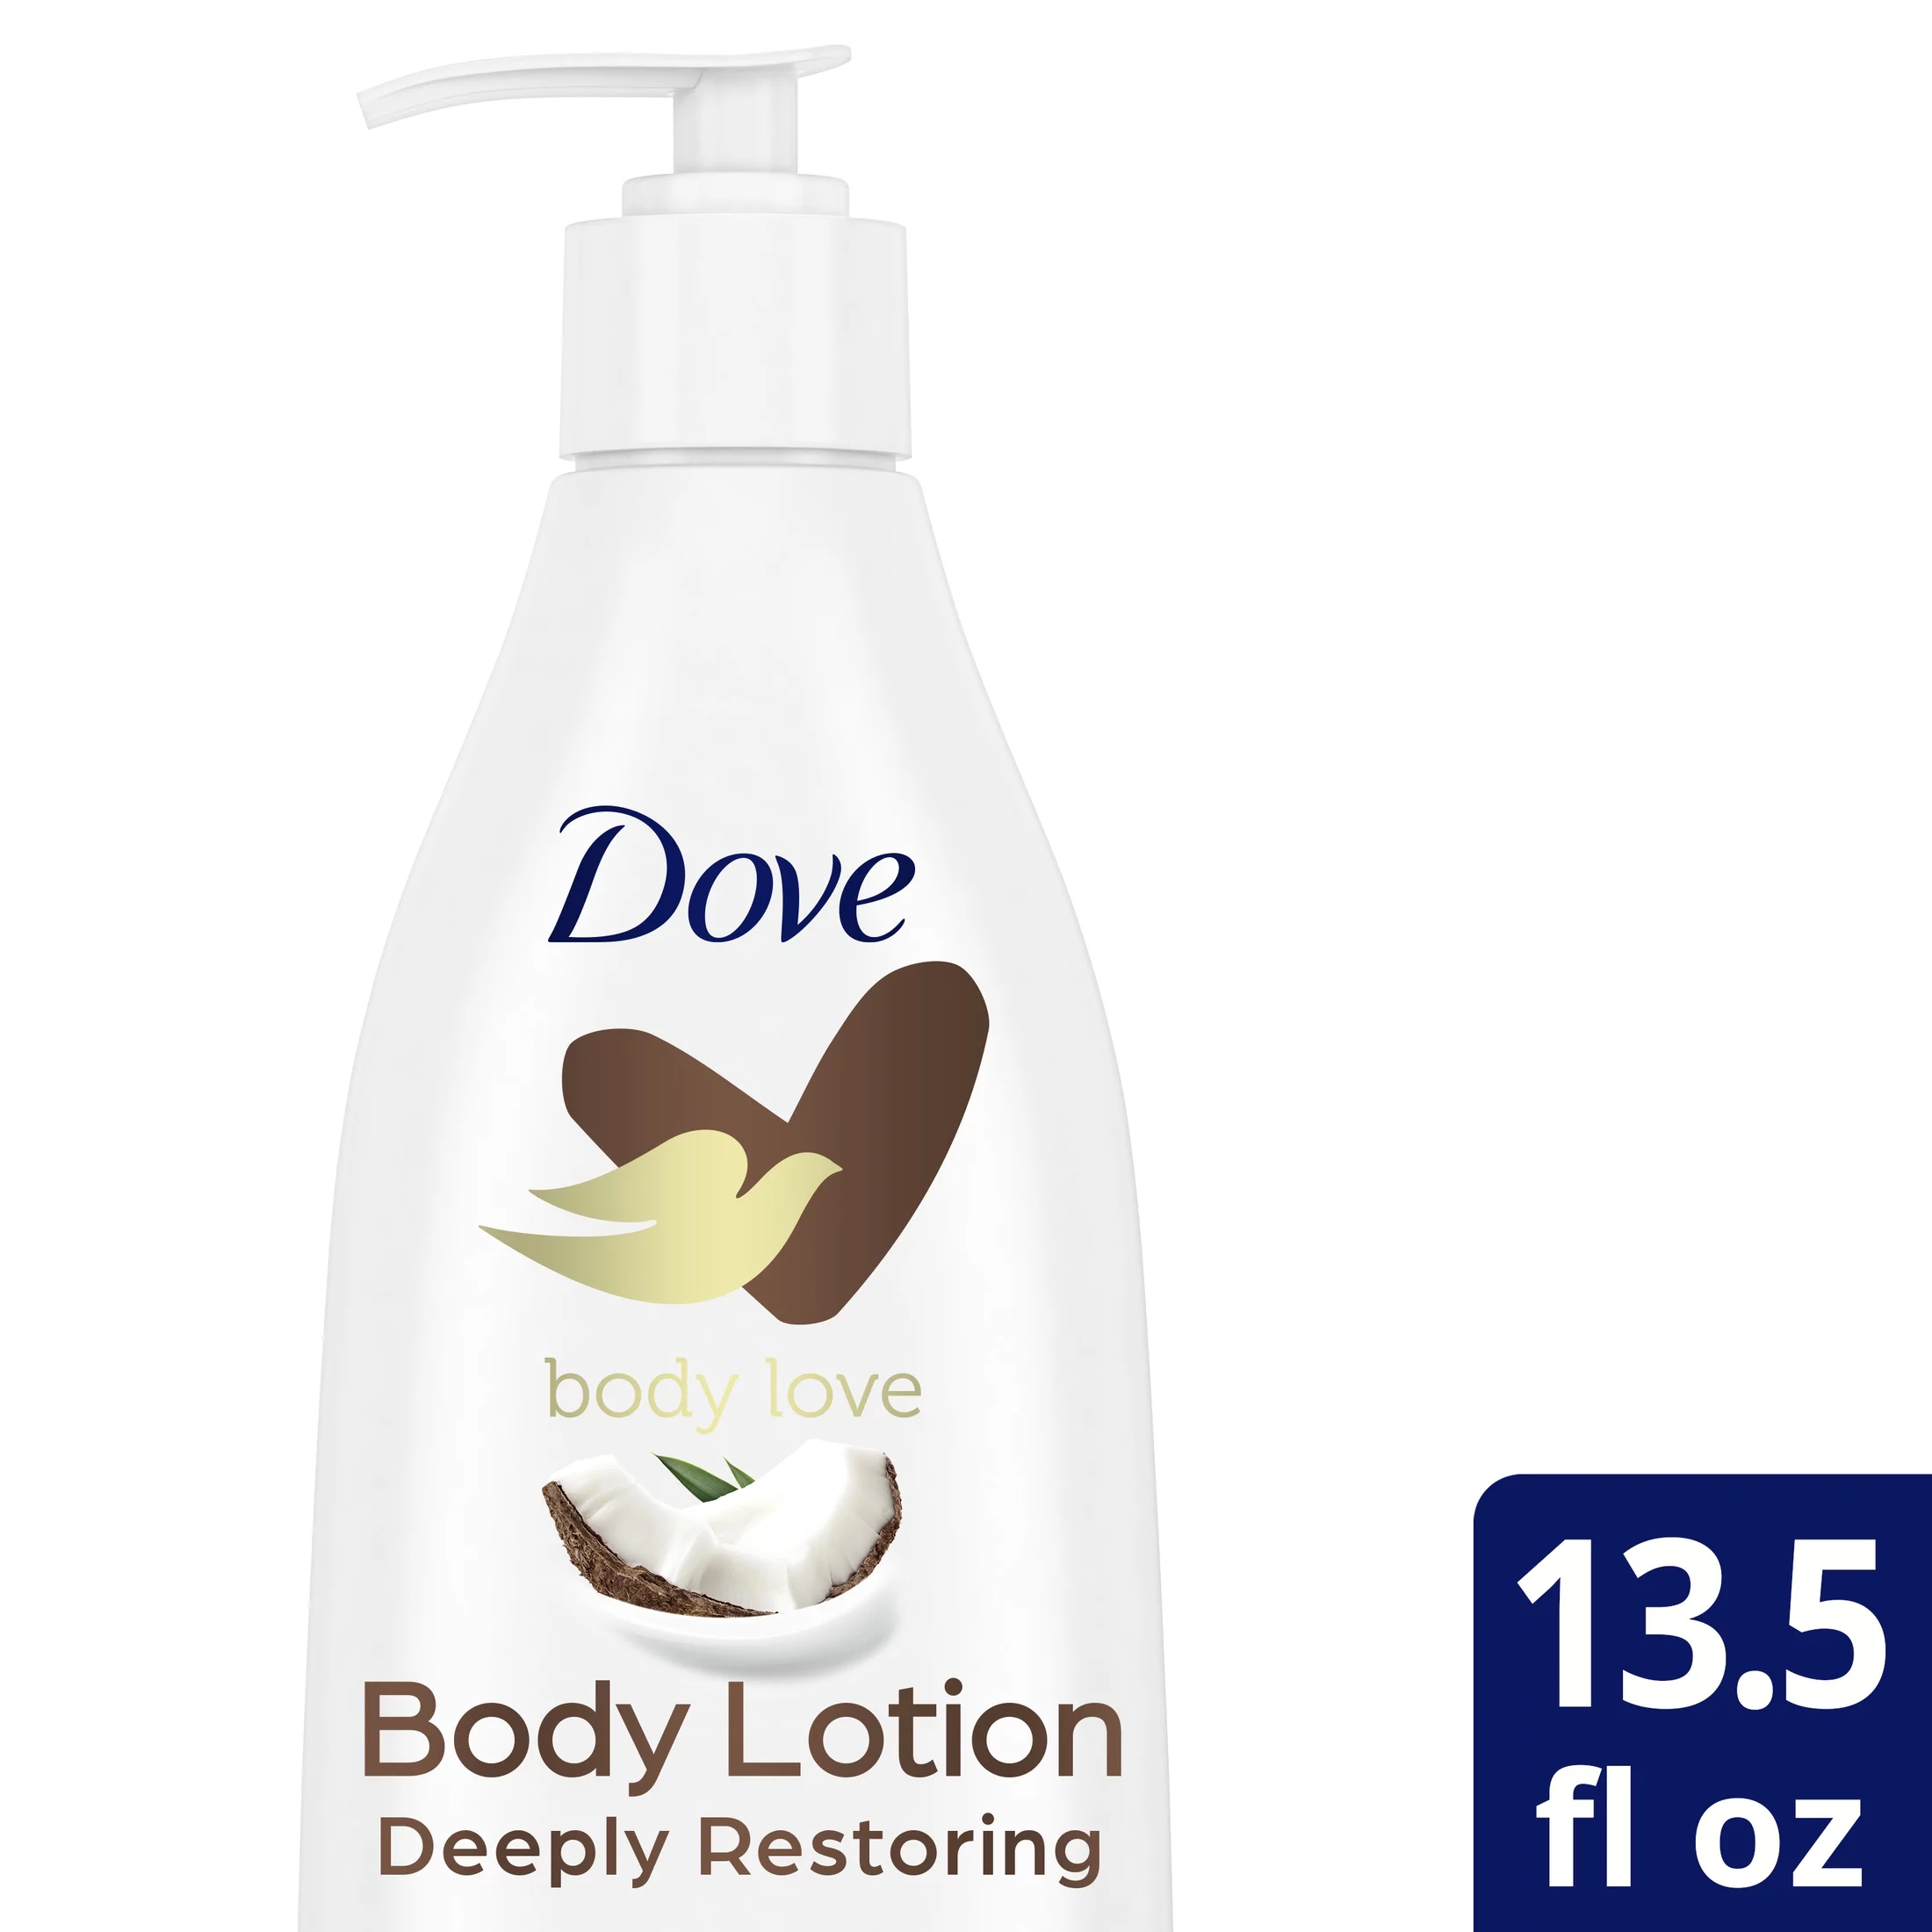 Dove Body Love Deeply Restoring Body Lotion for Dry Skin, Coconut Oil and Cocoa Butter, 13.5 fl oz